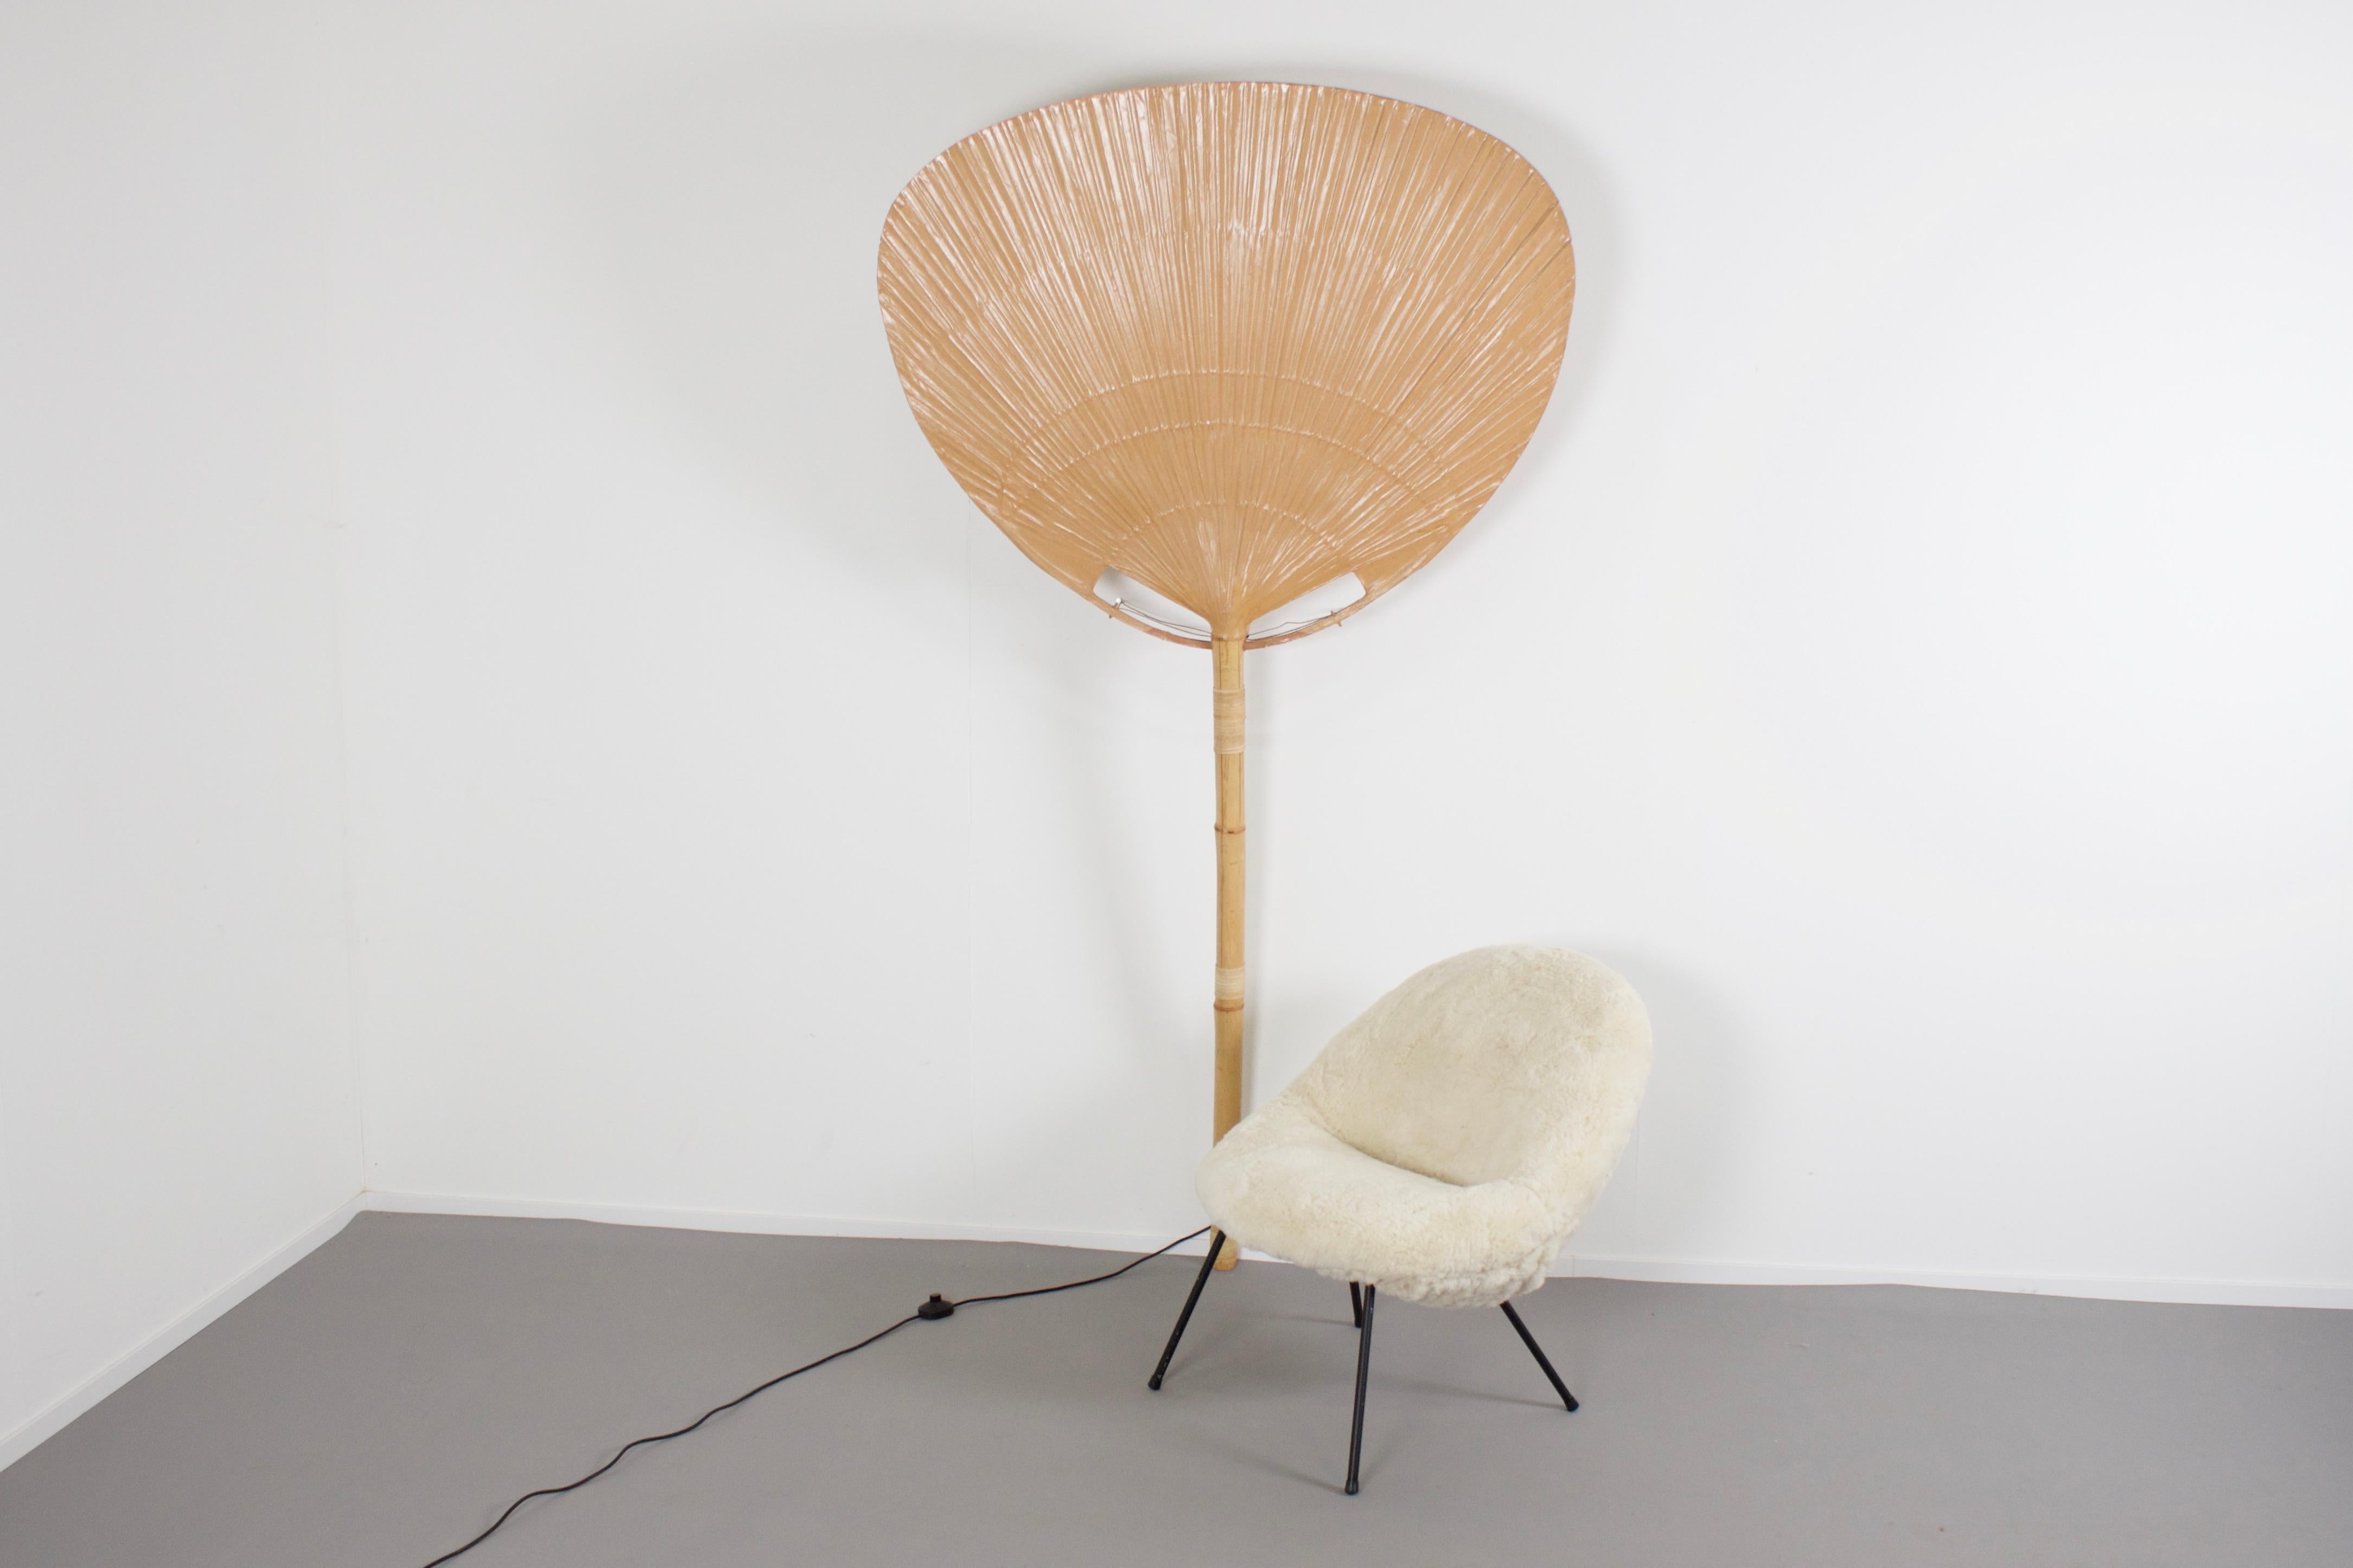 Rare large ‘Uchiwa’ fan floor lamp by Ingo Maurer in very good condition.

Designed by Ingo Maurer for M design, Germany.

This lamp was handmade in 1977 from bamboo, wicker and Japanese rice paper.
They are very fragile and therefor very hard to